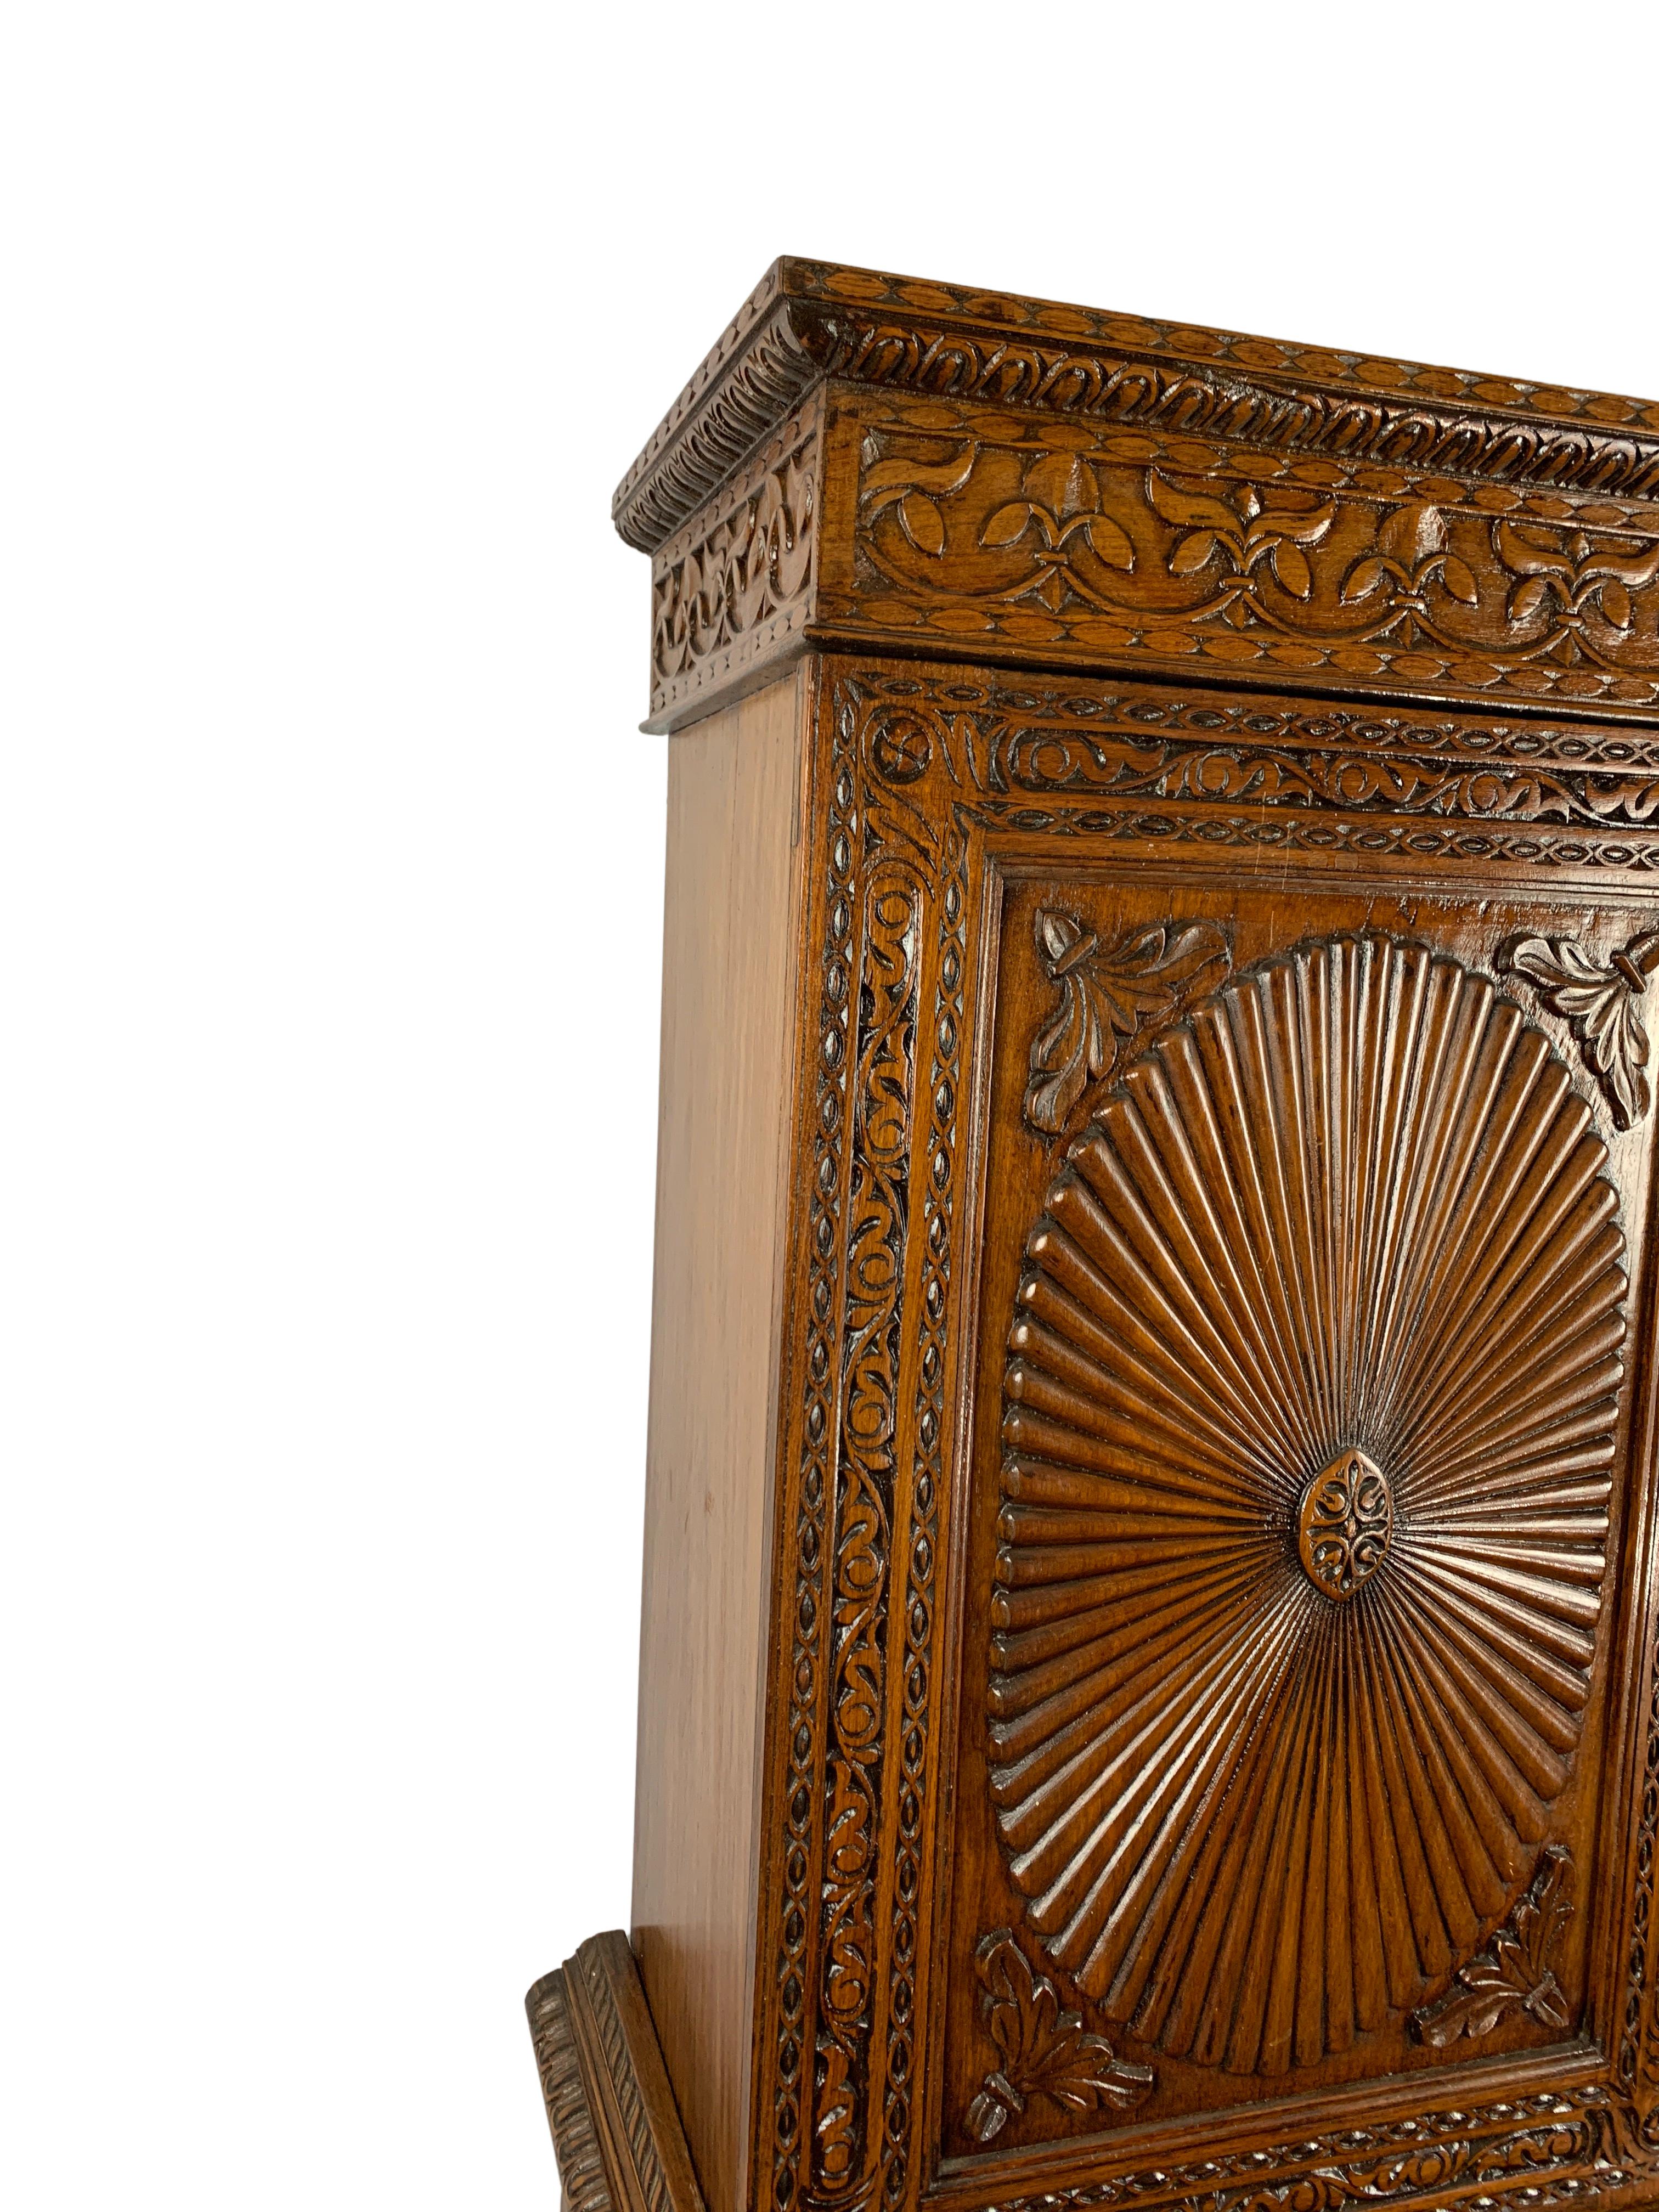 Anglo-Indian linen press with four carved sunburst paneled doors, floral carving through out and raised on bun feet. The upper and lower case each with two shelves, 19th century probably made in Bombay.
 